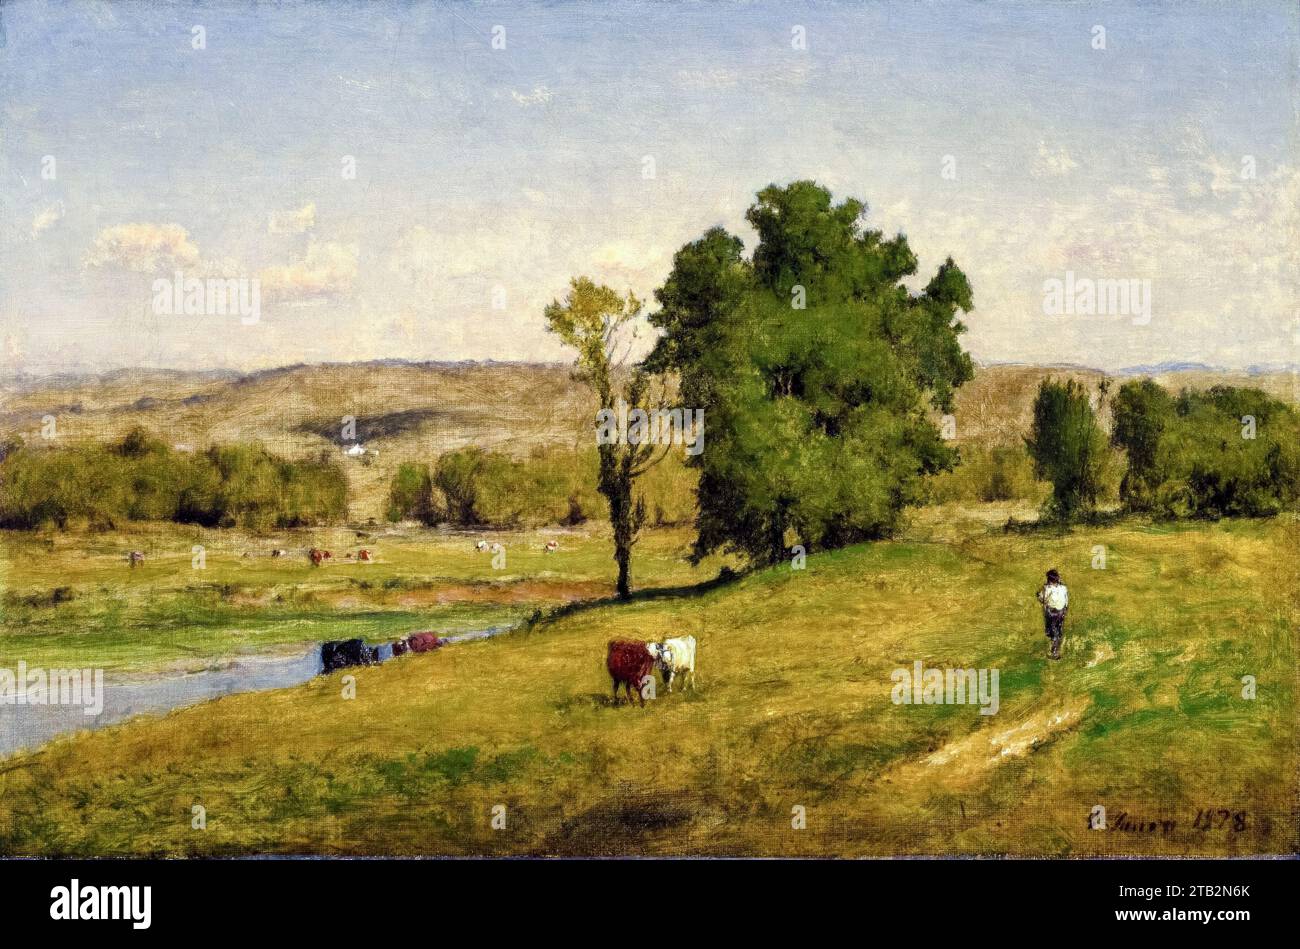 George Inness, Landscape, painting in oil on canvas, 1878 Stock Photo